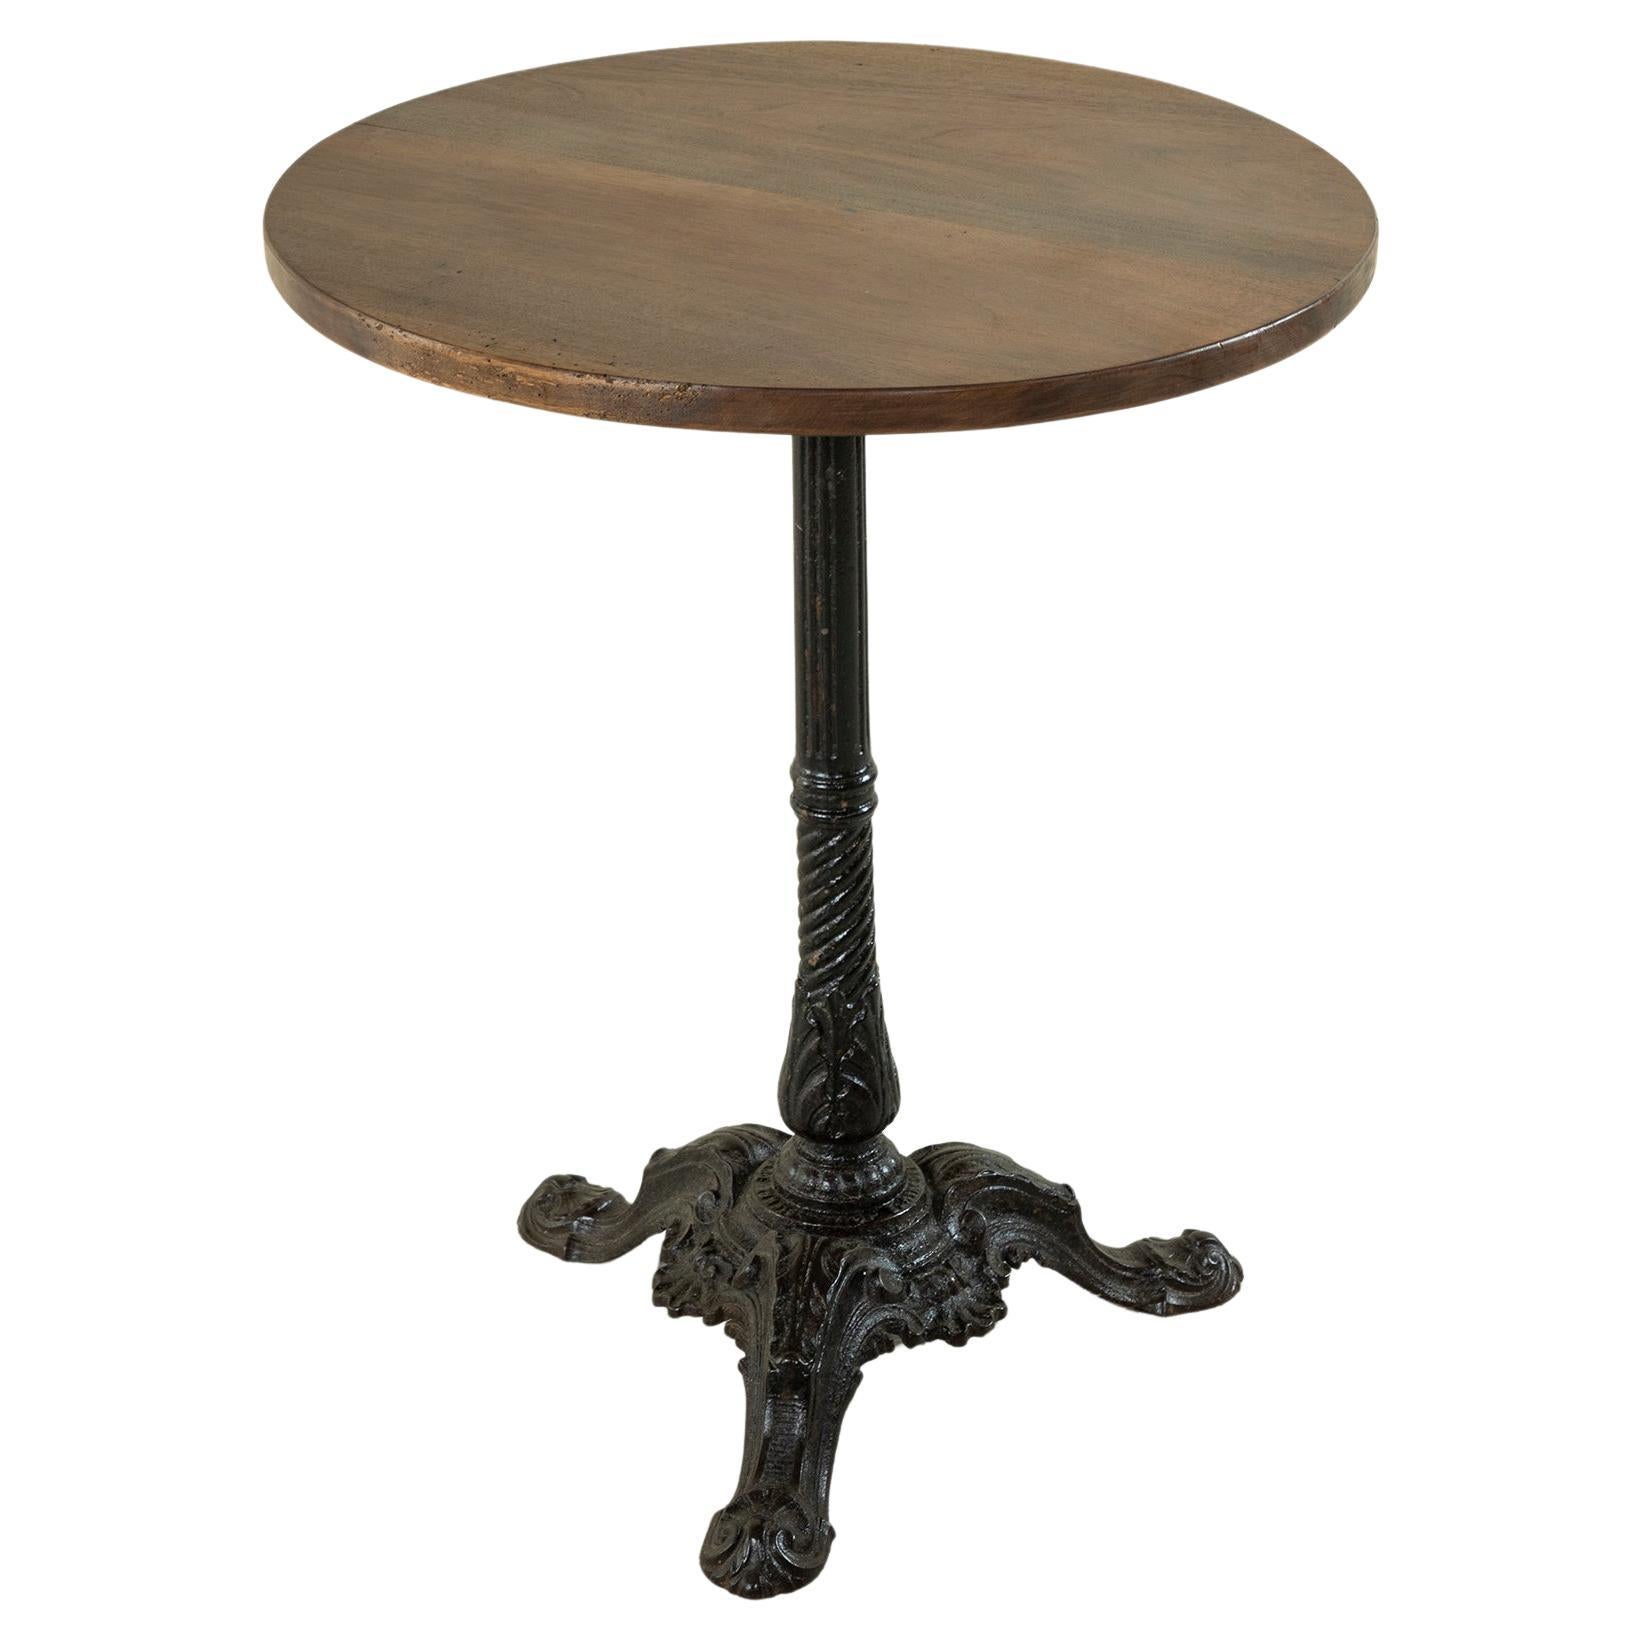 Late 19th Century French Iron Bistro Table with Round Walnut Top